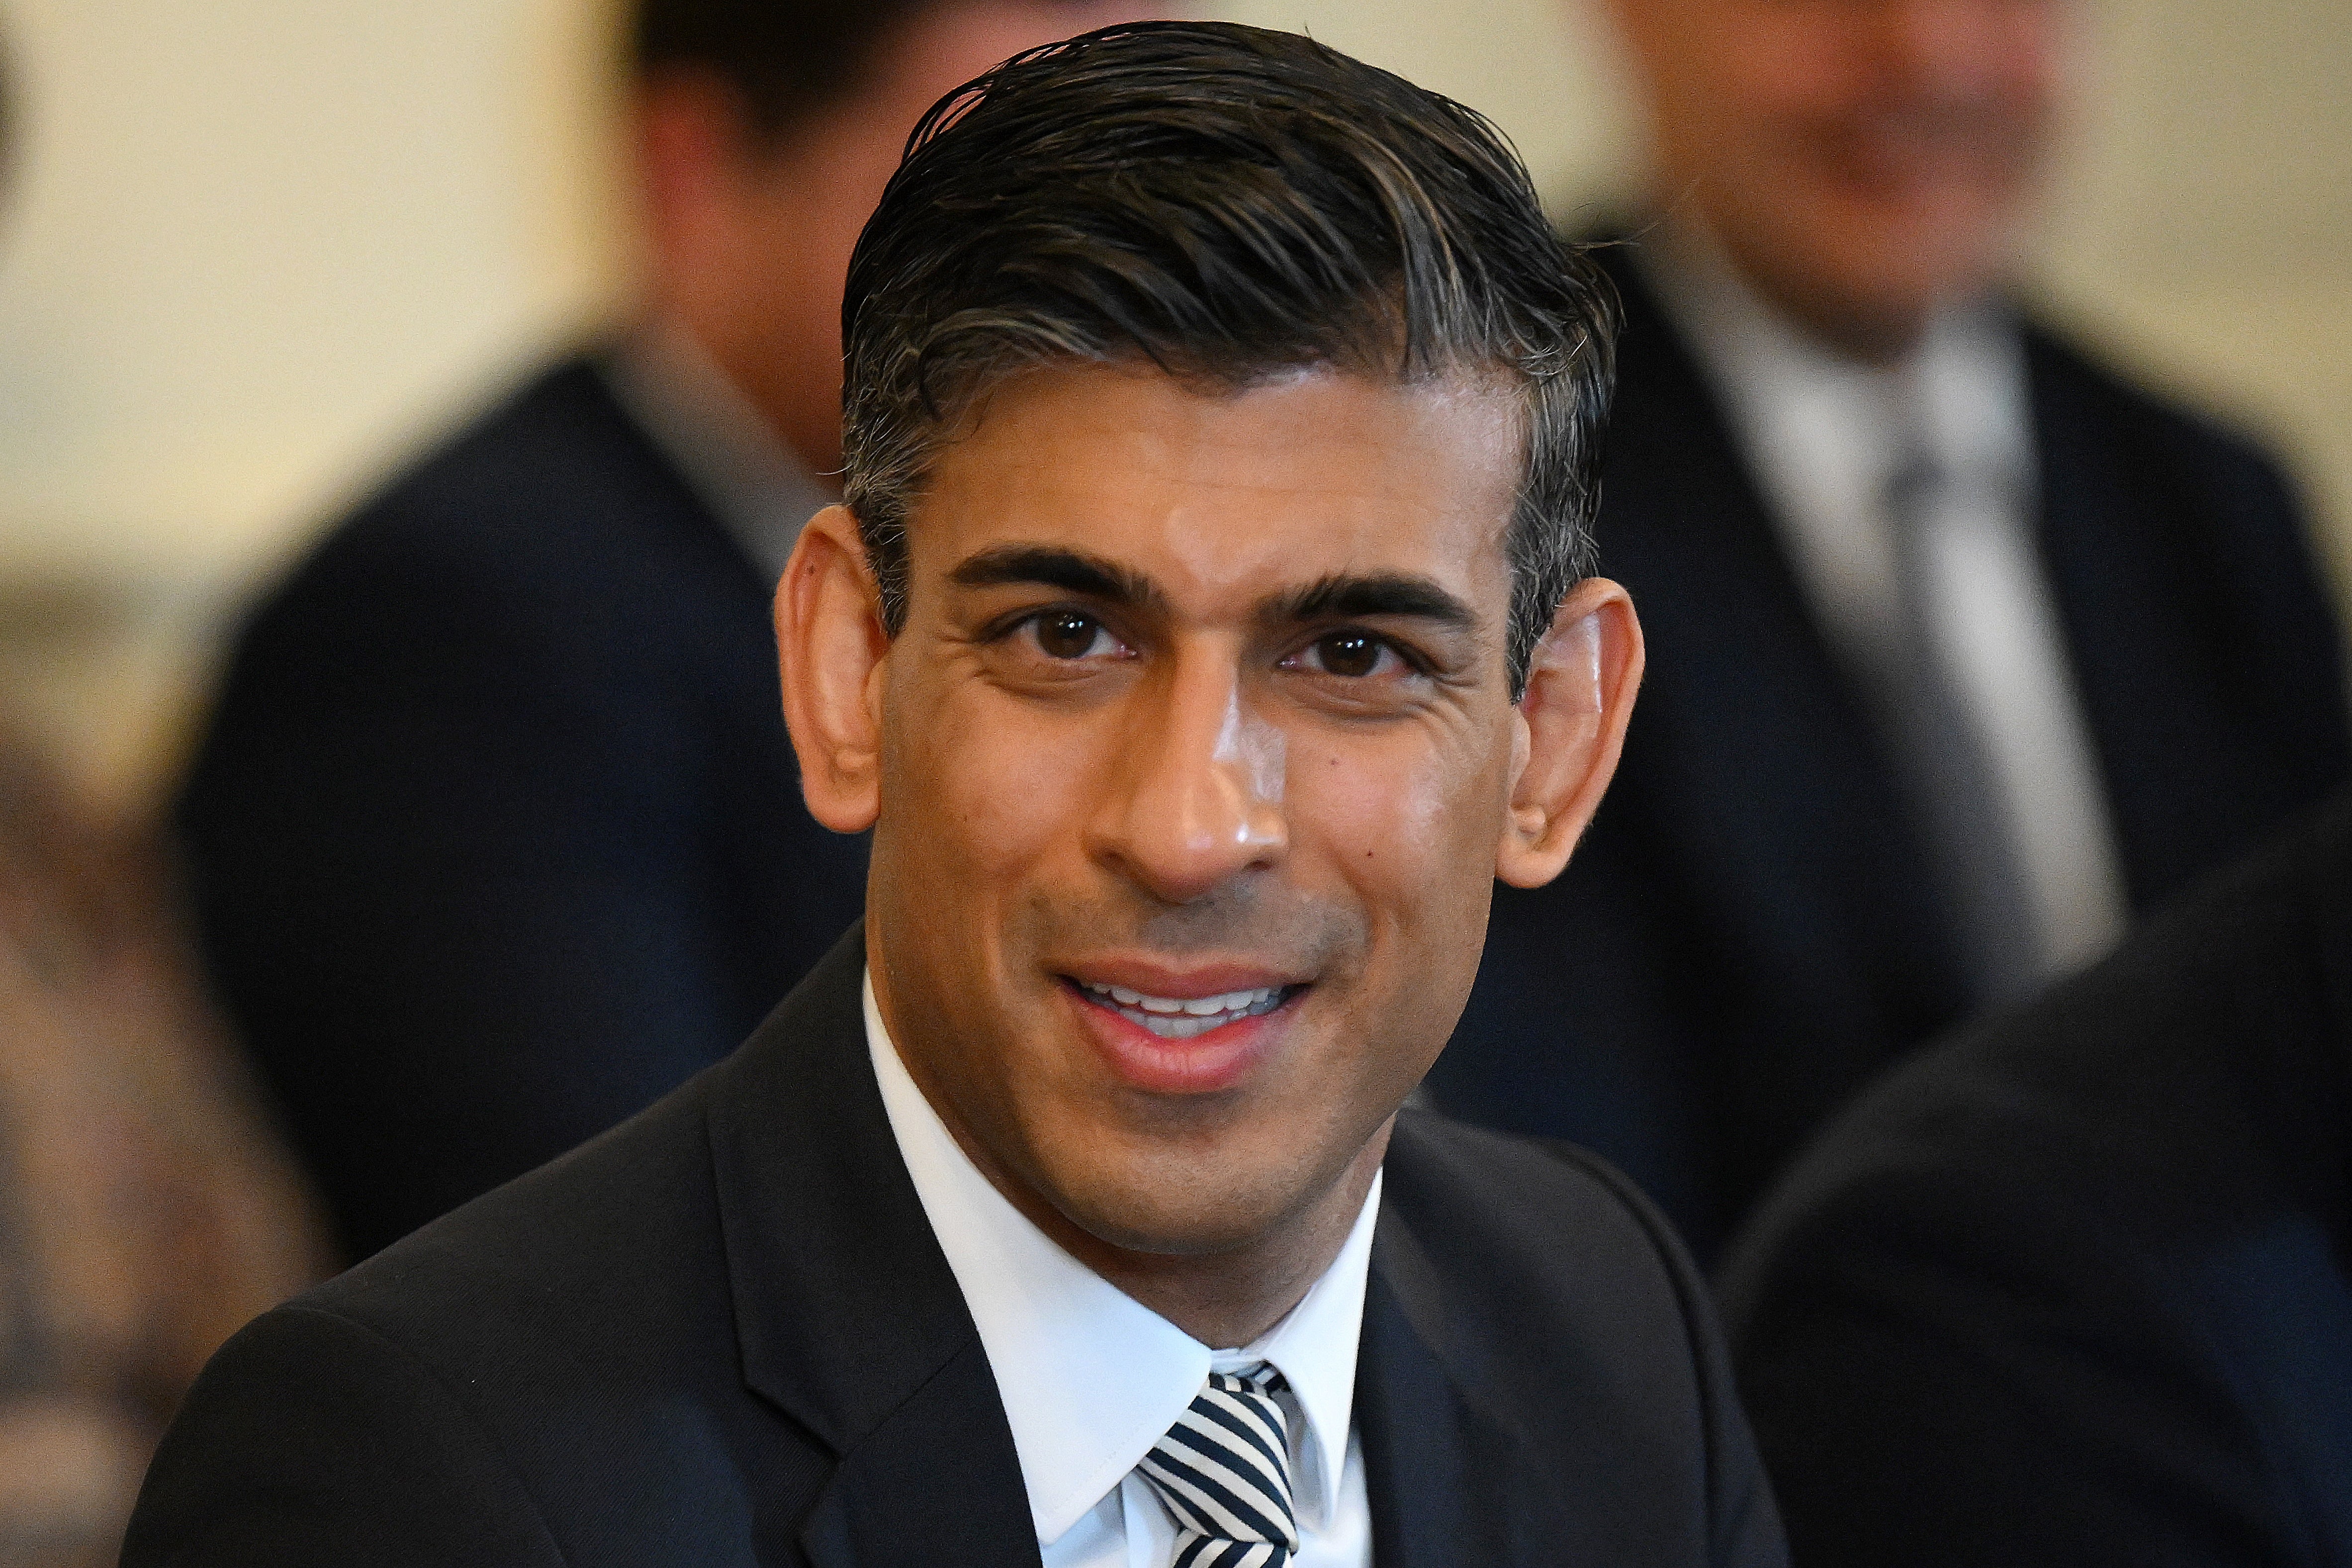 Chancellor Rishi Sunak has said he will reduce taxes on business amid Tory calls for tax cuts (Daniel Leal/PA)